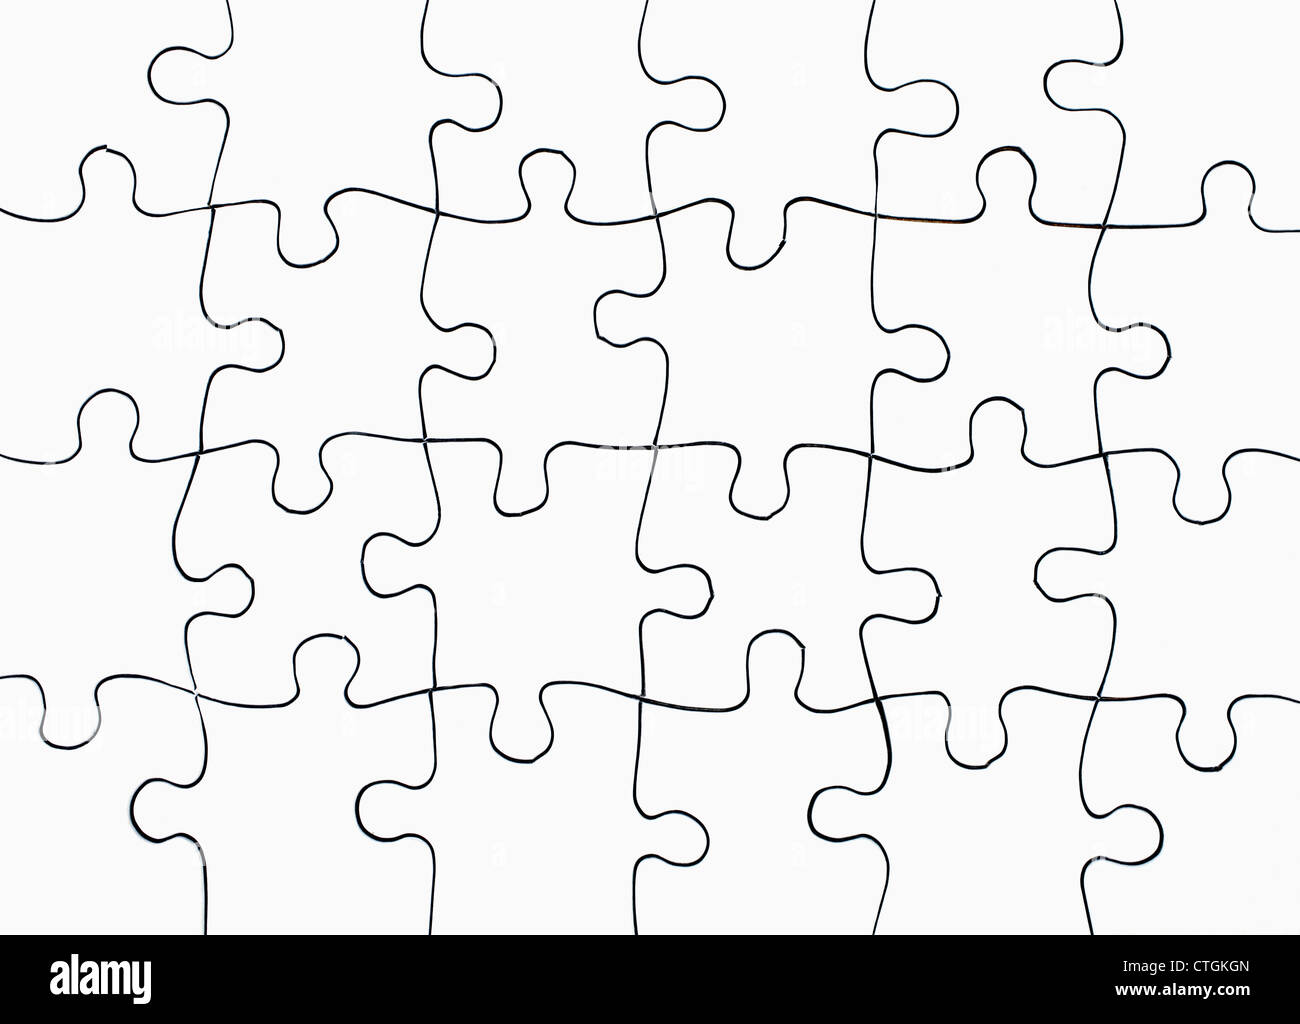 Blank jigsaw puzzle pieces Stock Photo